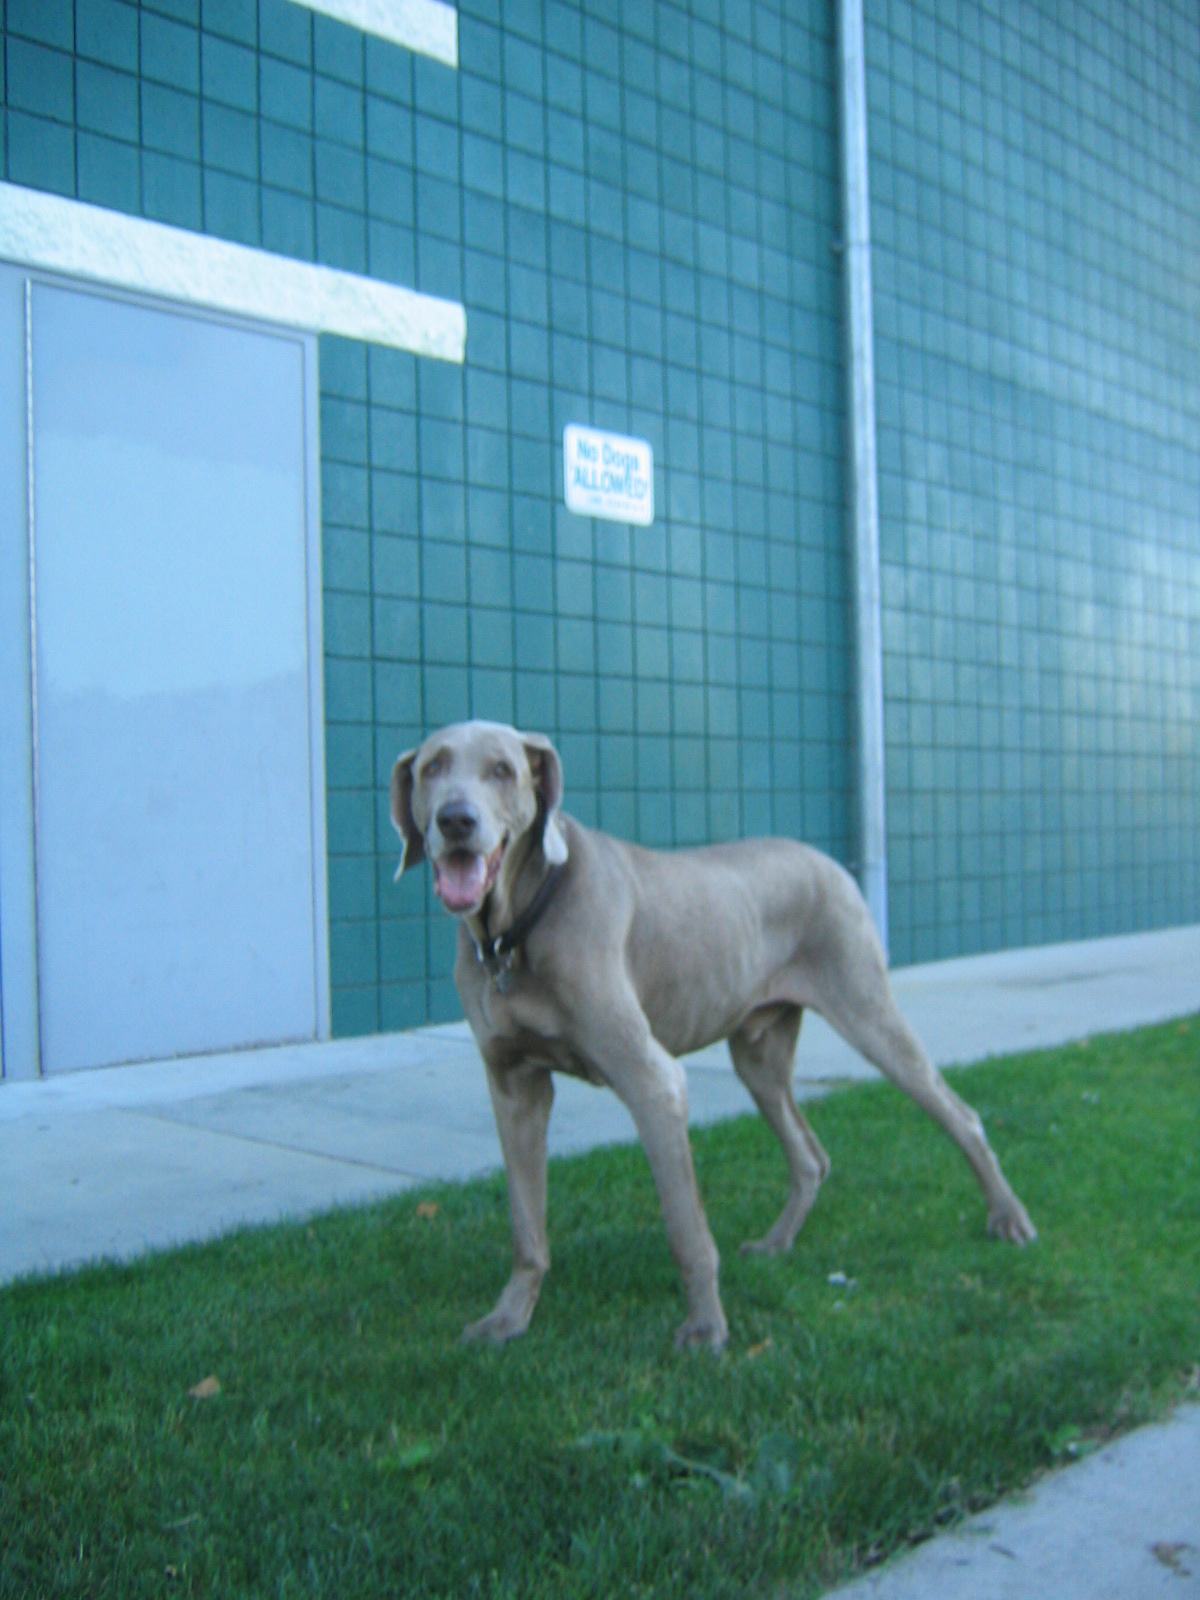 Yeager displays disregard for authority, Pan-Pacific Park, July 2009